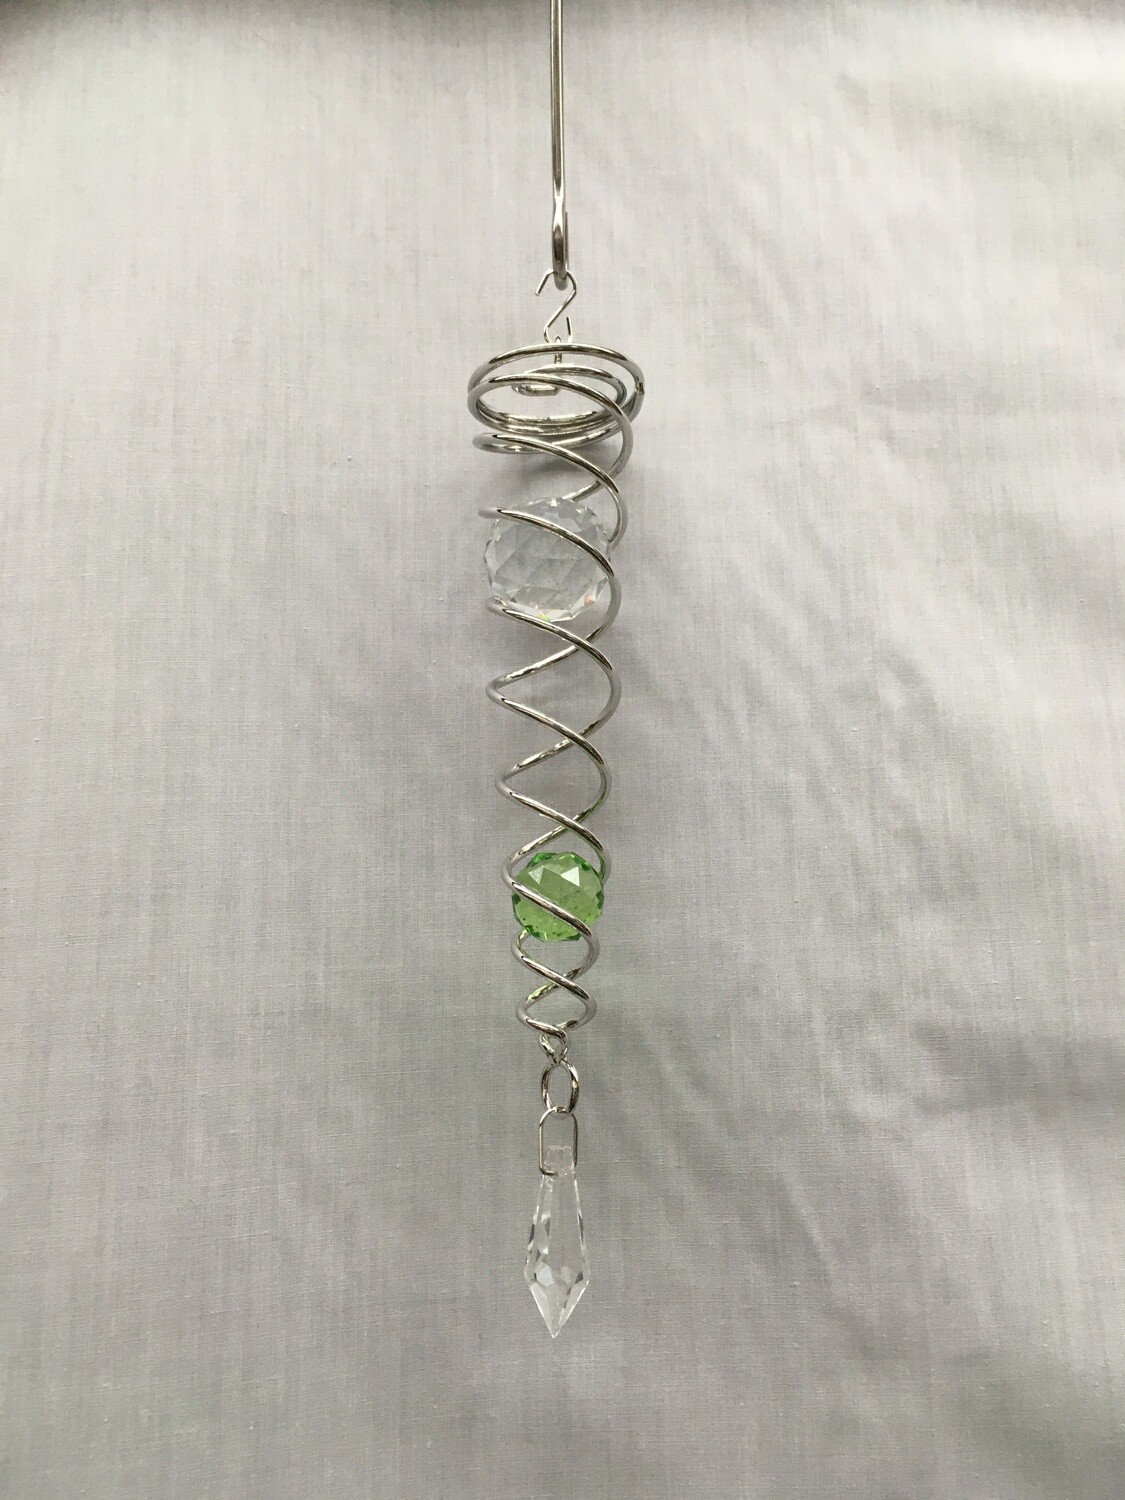 Small spiral Tail - Green and clear crystal balls